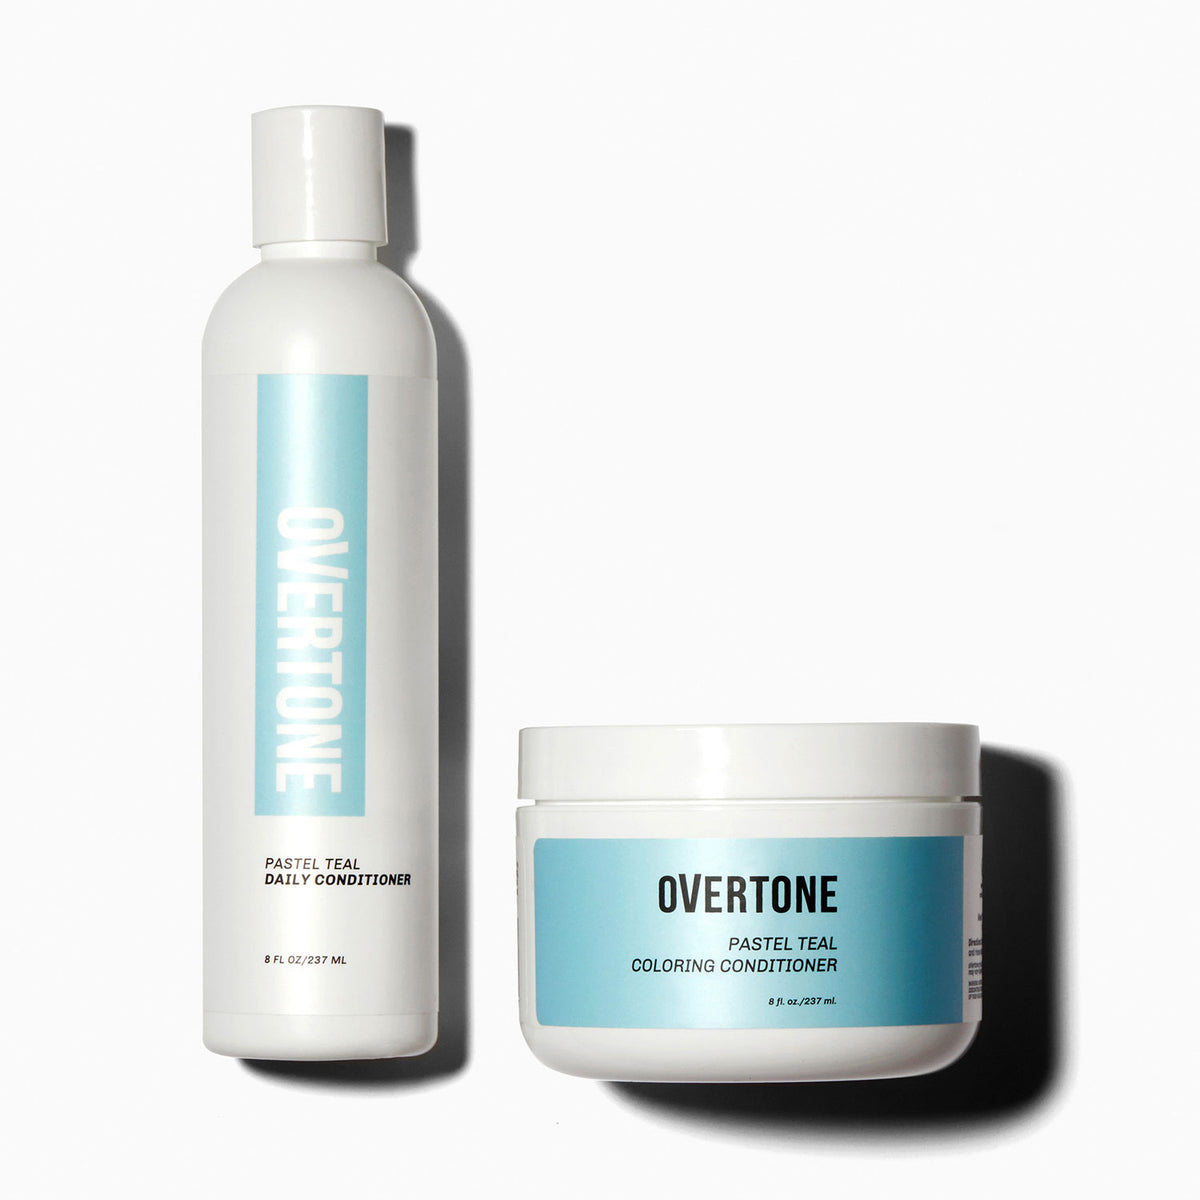 oVertone Pastel Teal Coloring Conditioner and Daily Conditioner